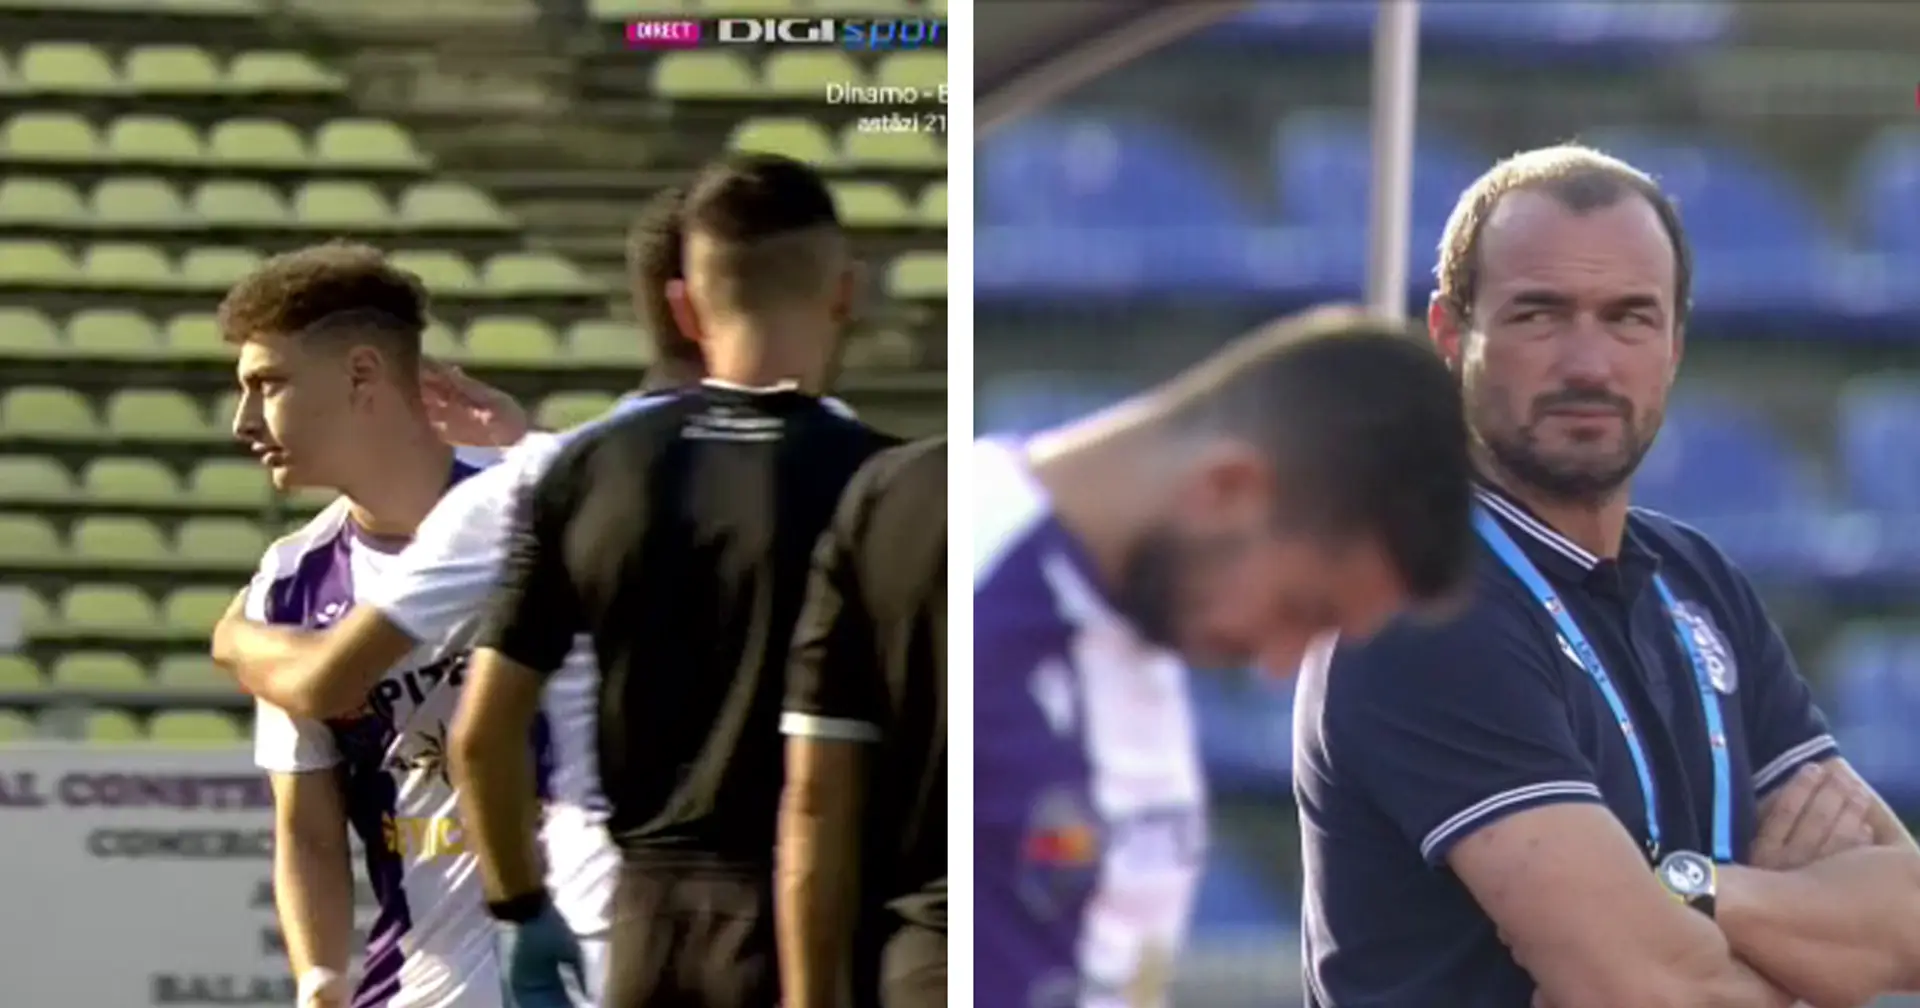 Romanian head coach subs off youngster on 1st minute for 3 games in row